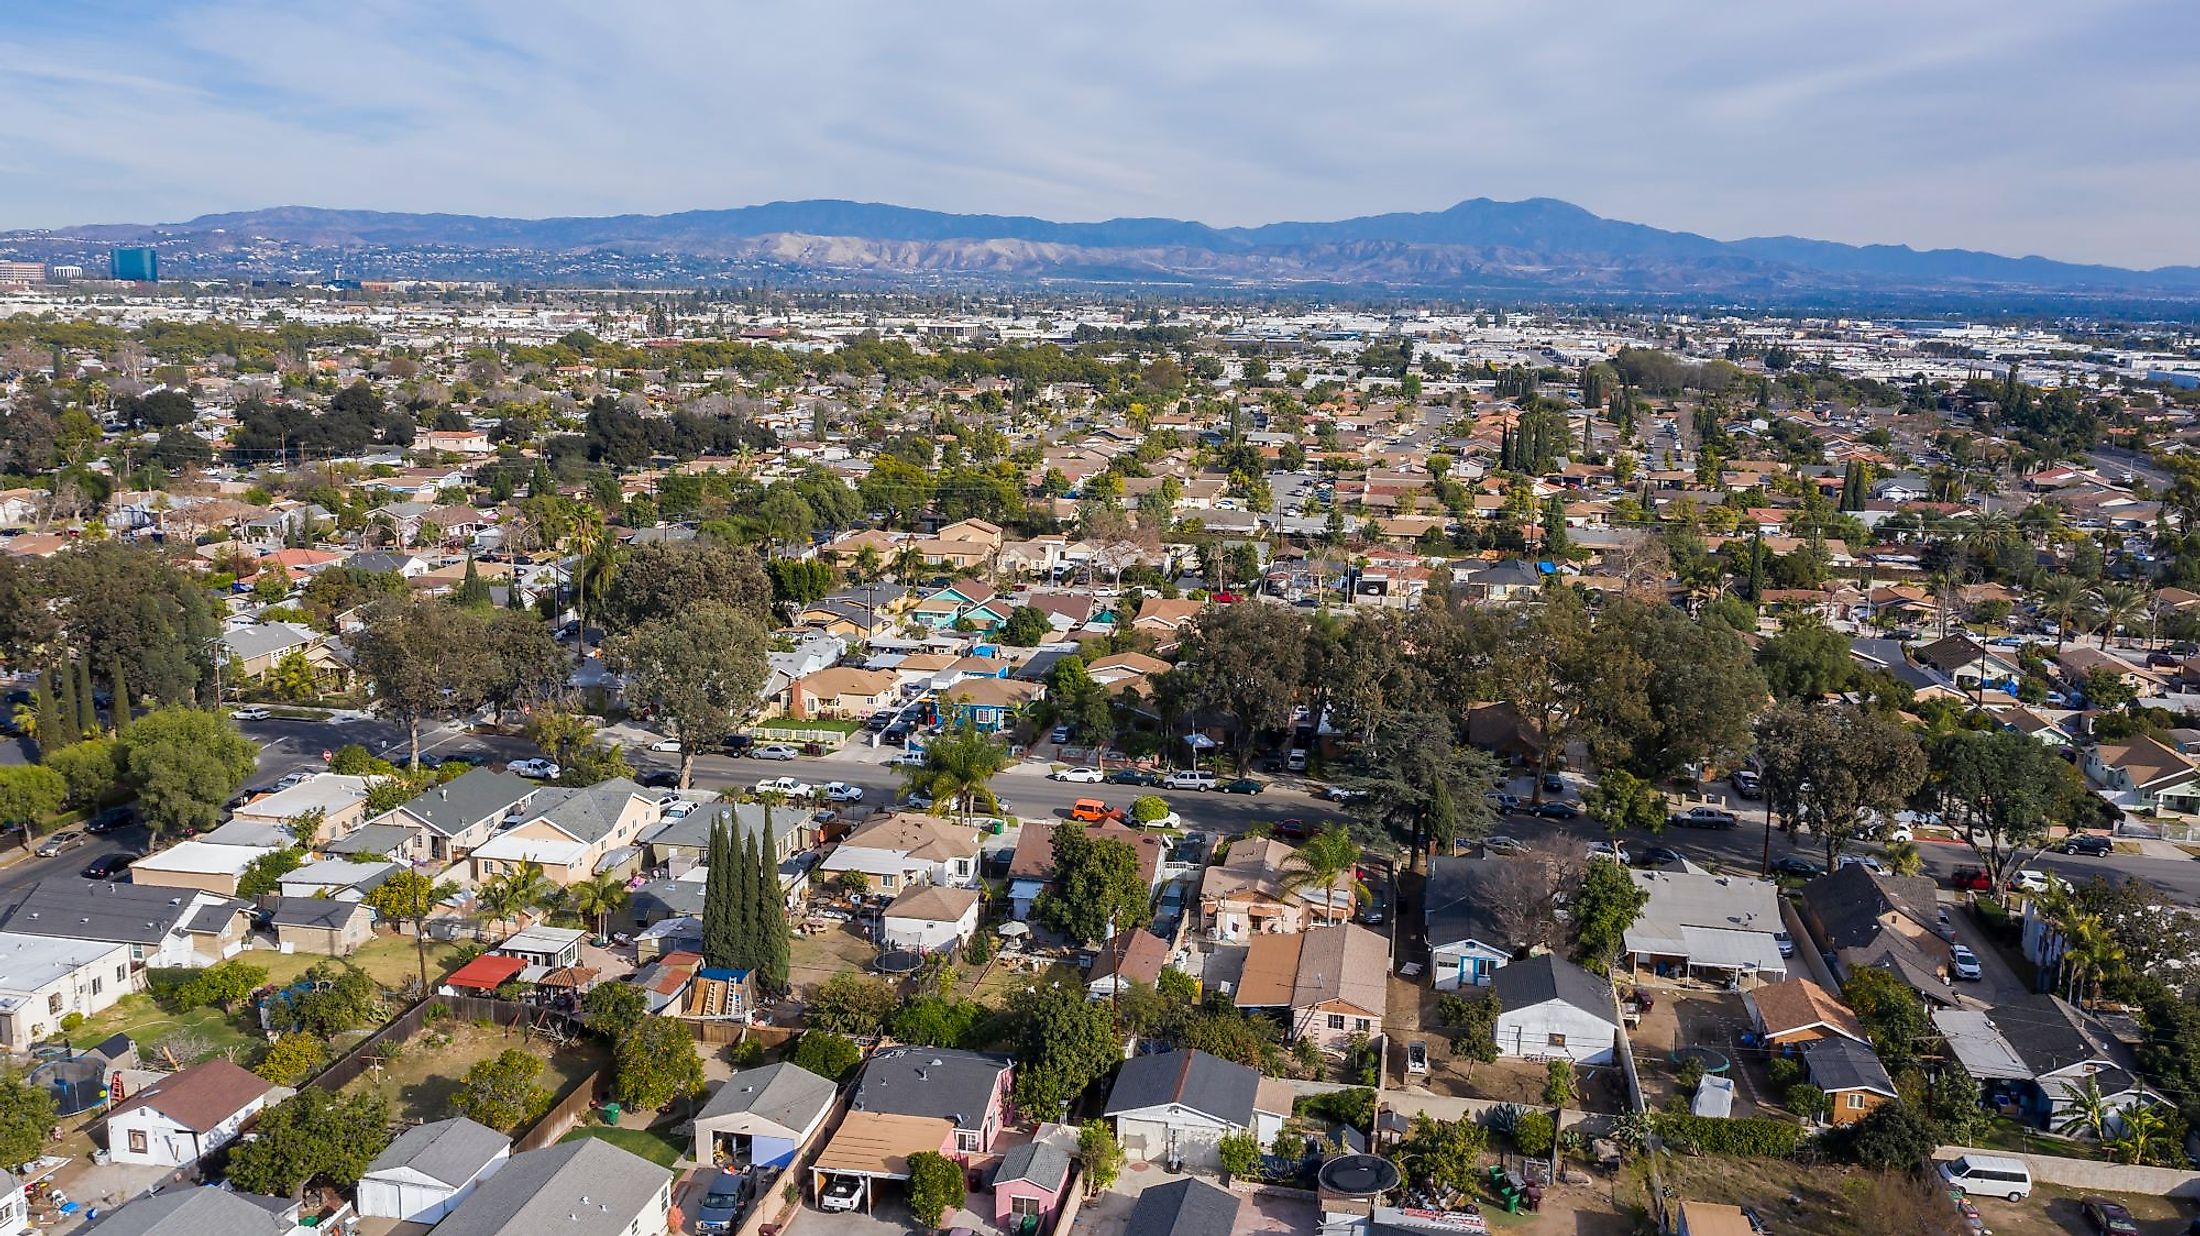 Day time aerial view of a residential area in Santa Ana, California